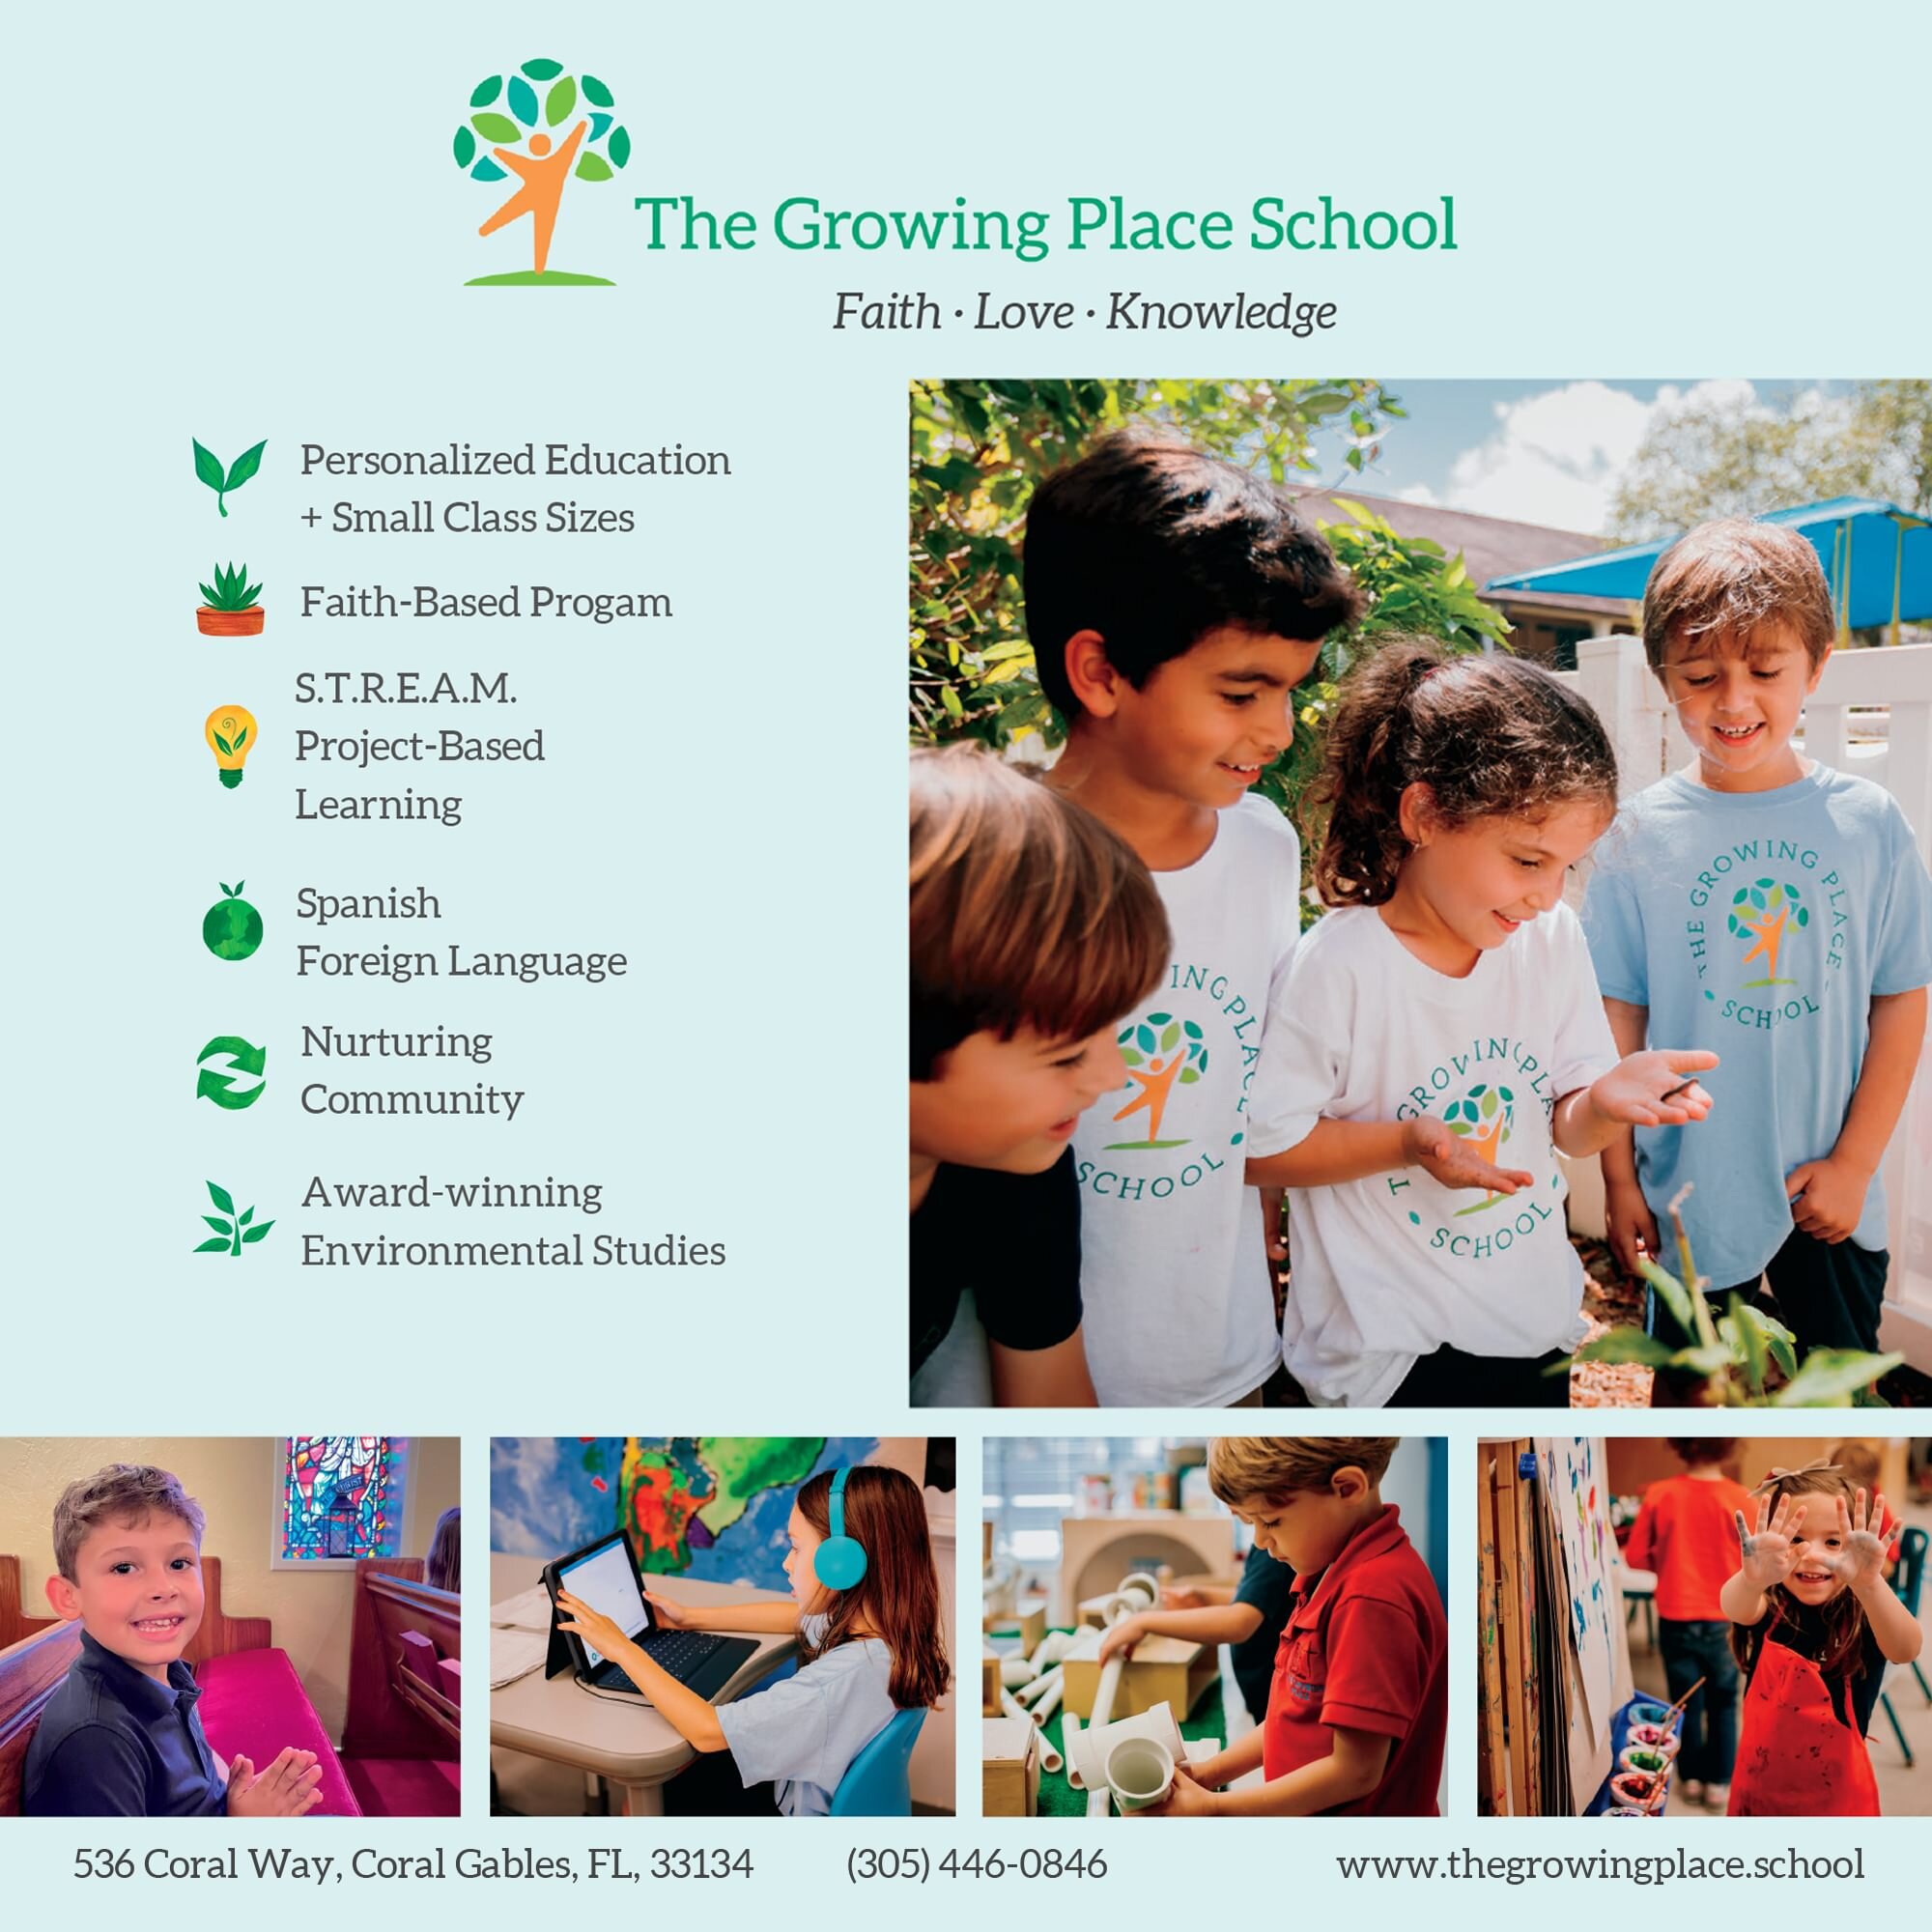 Set in a community atmosphere, The Growing Place provides children with a positive, inspiring, creative, and supportive learning environment, anchored in
Christian faith and founded on best practices in innovative education. @thegrowingplaceschool ho